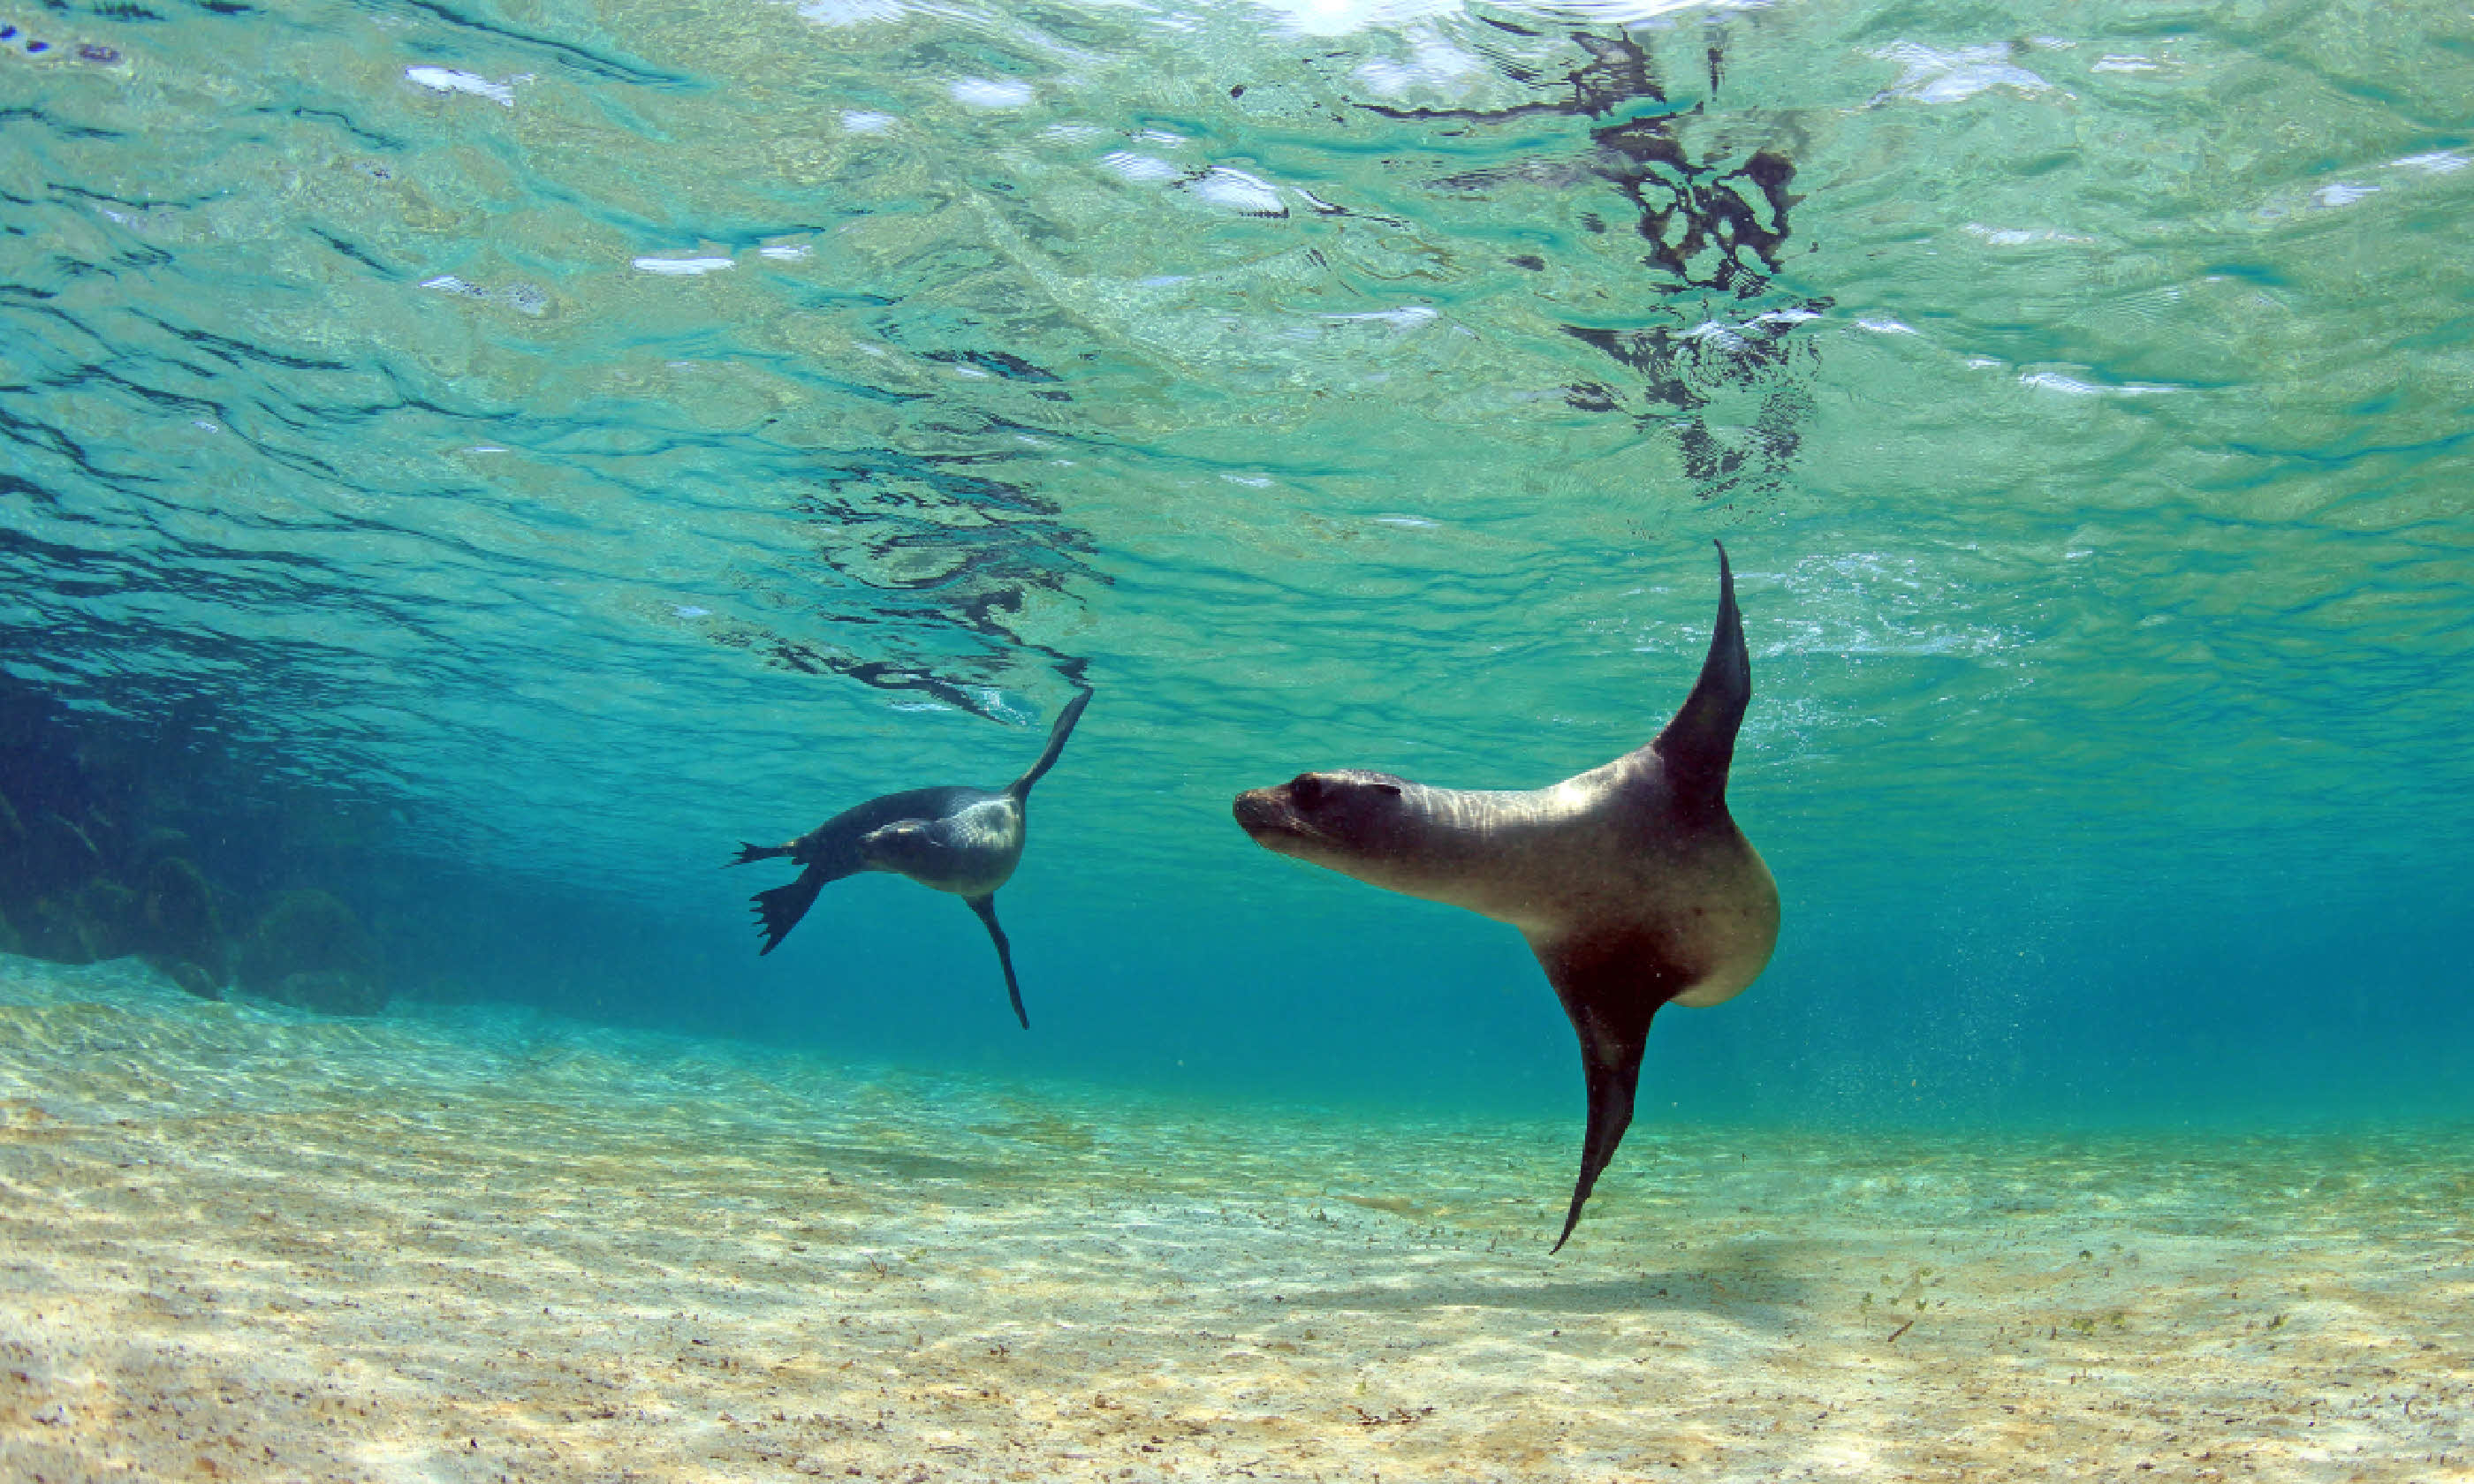 Sea lions in the Galapagos Islands (Shutterstock)